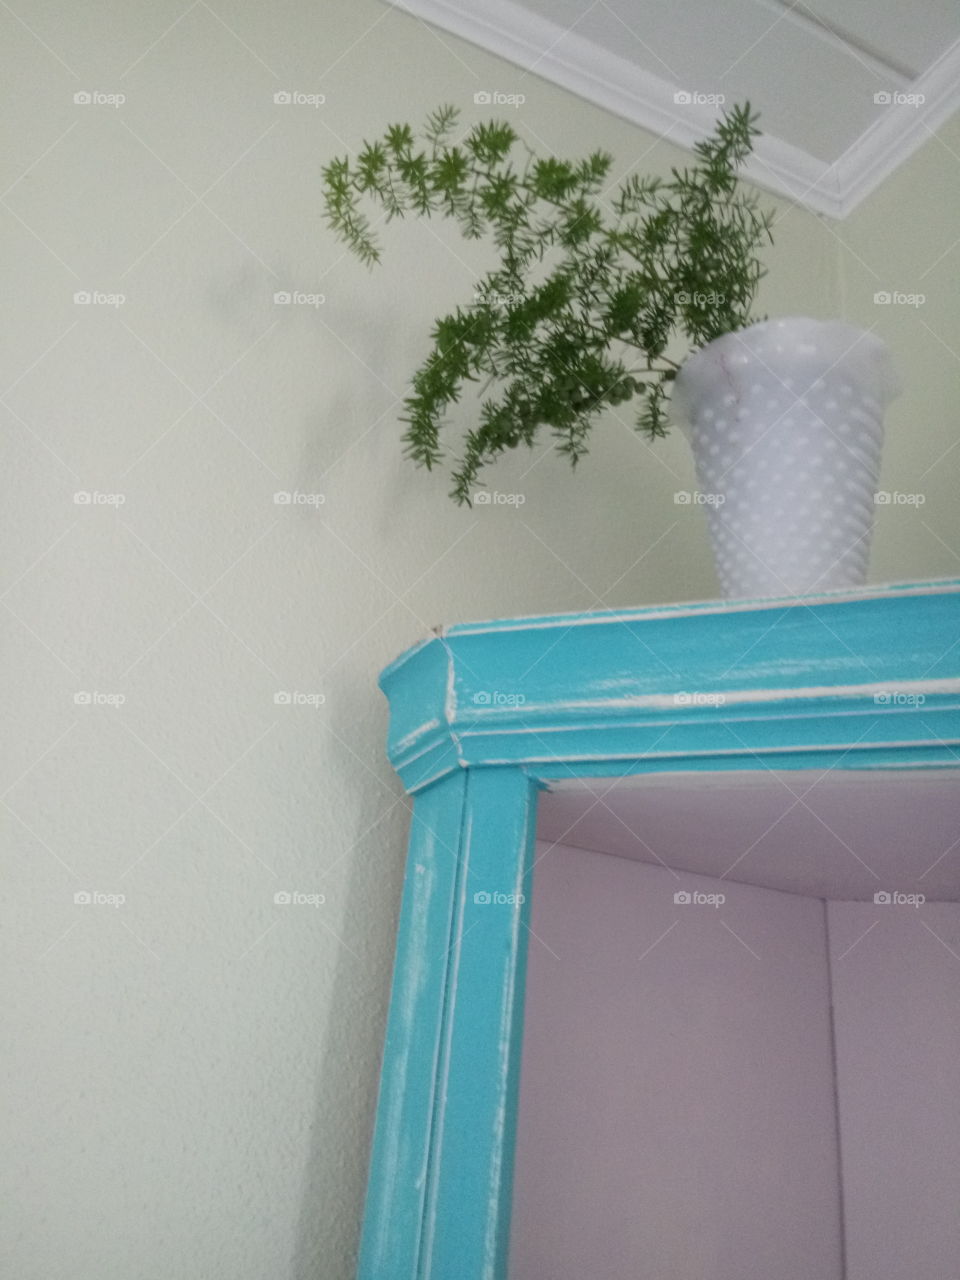 a house plant placed at the top of a cabinet as decor